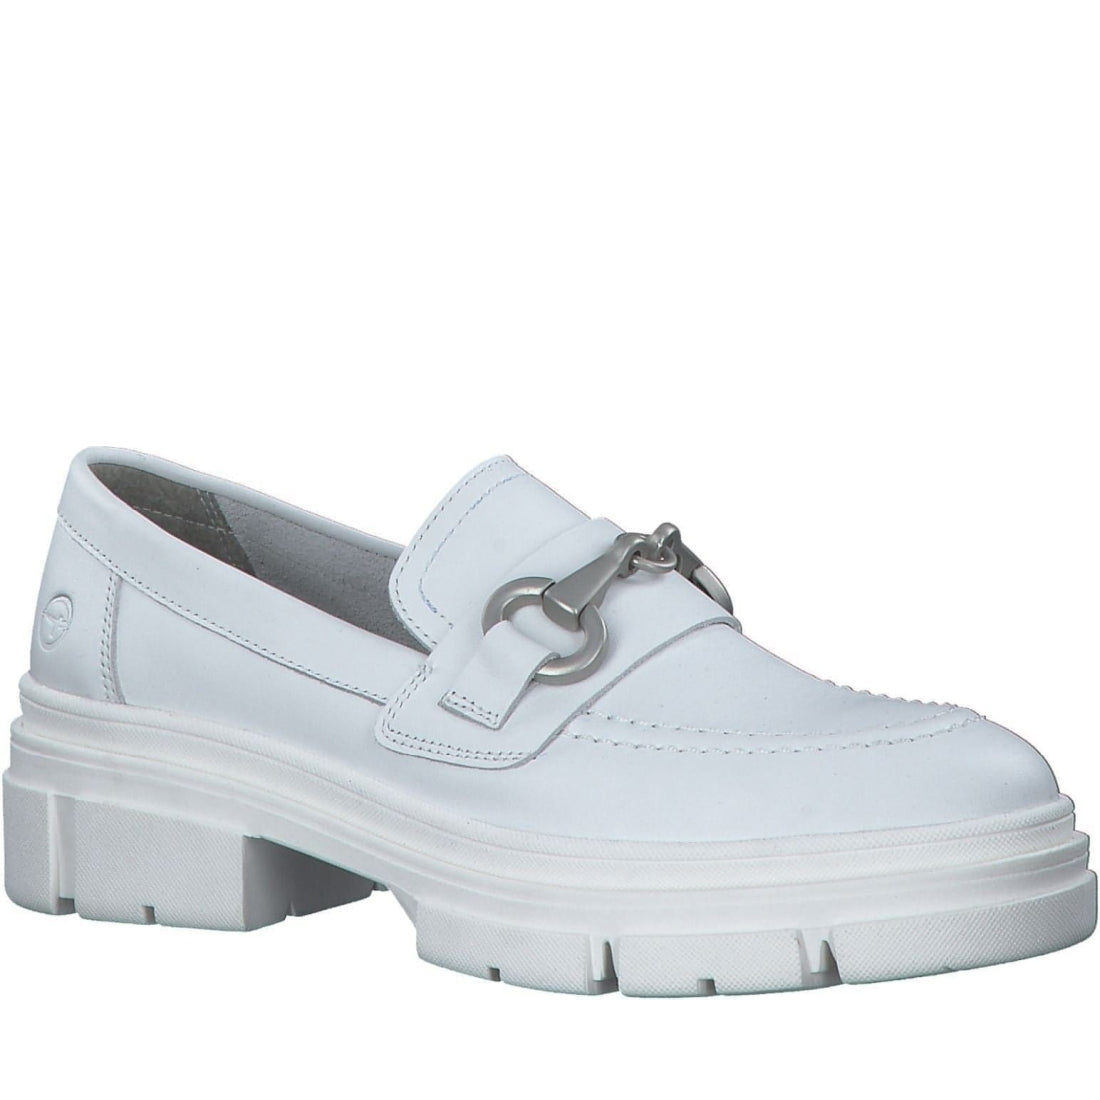 Tamaris womens white leather casual closed loafers | Vilbury London